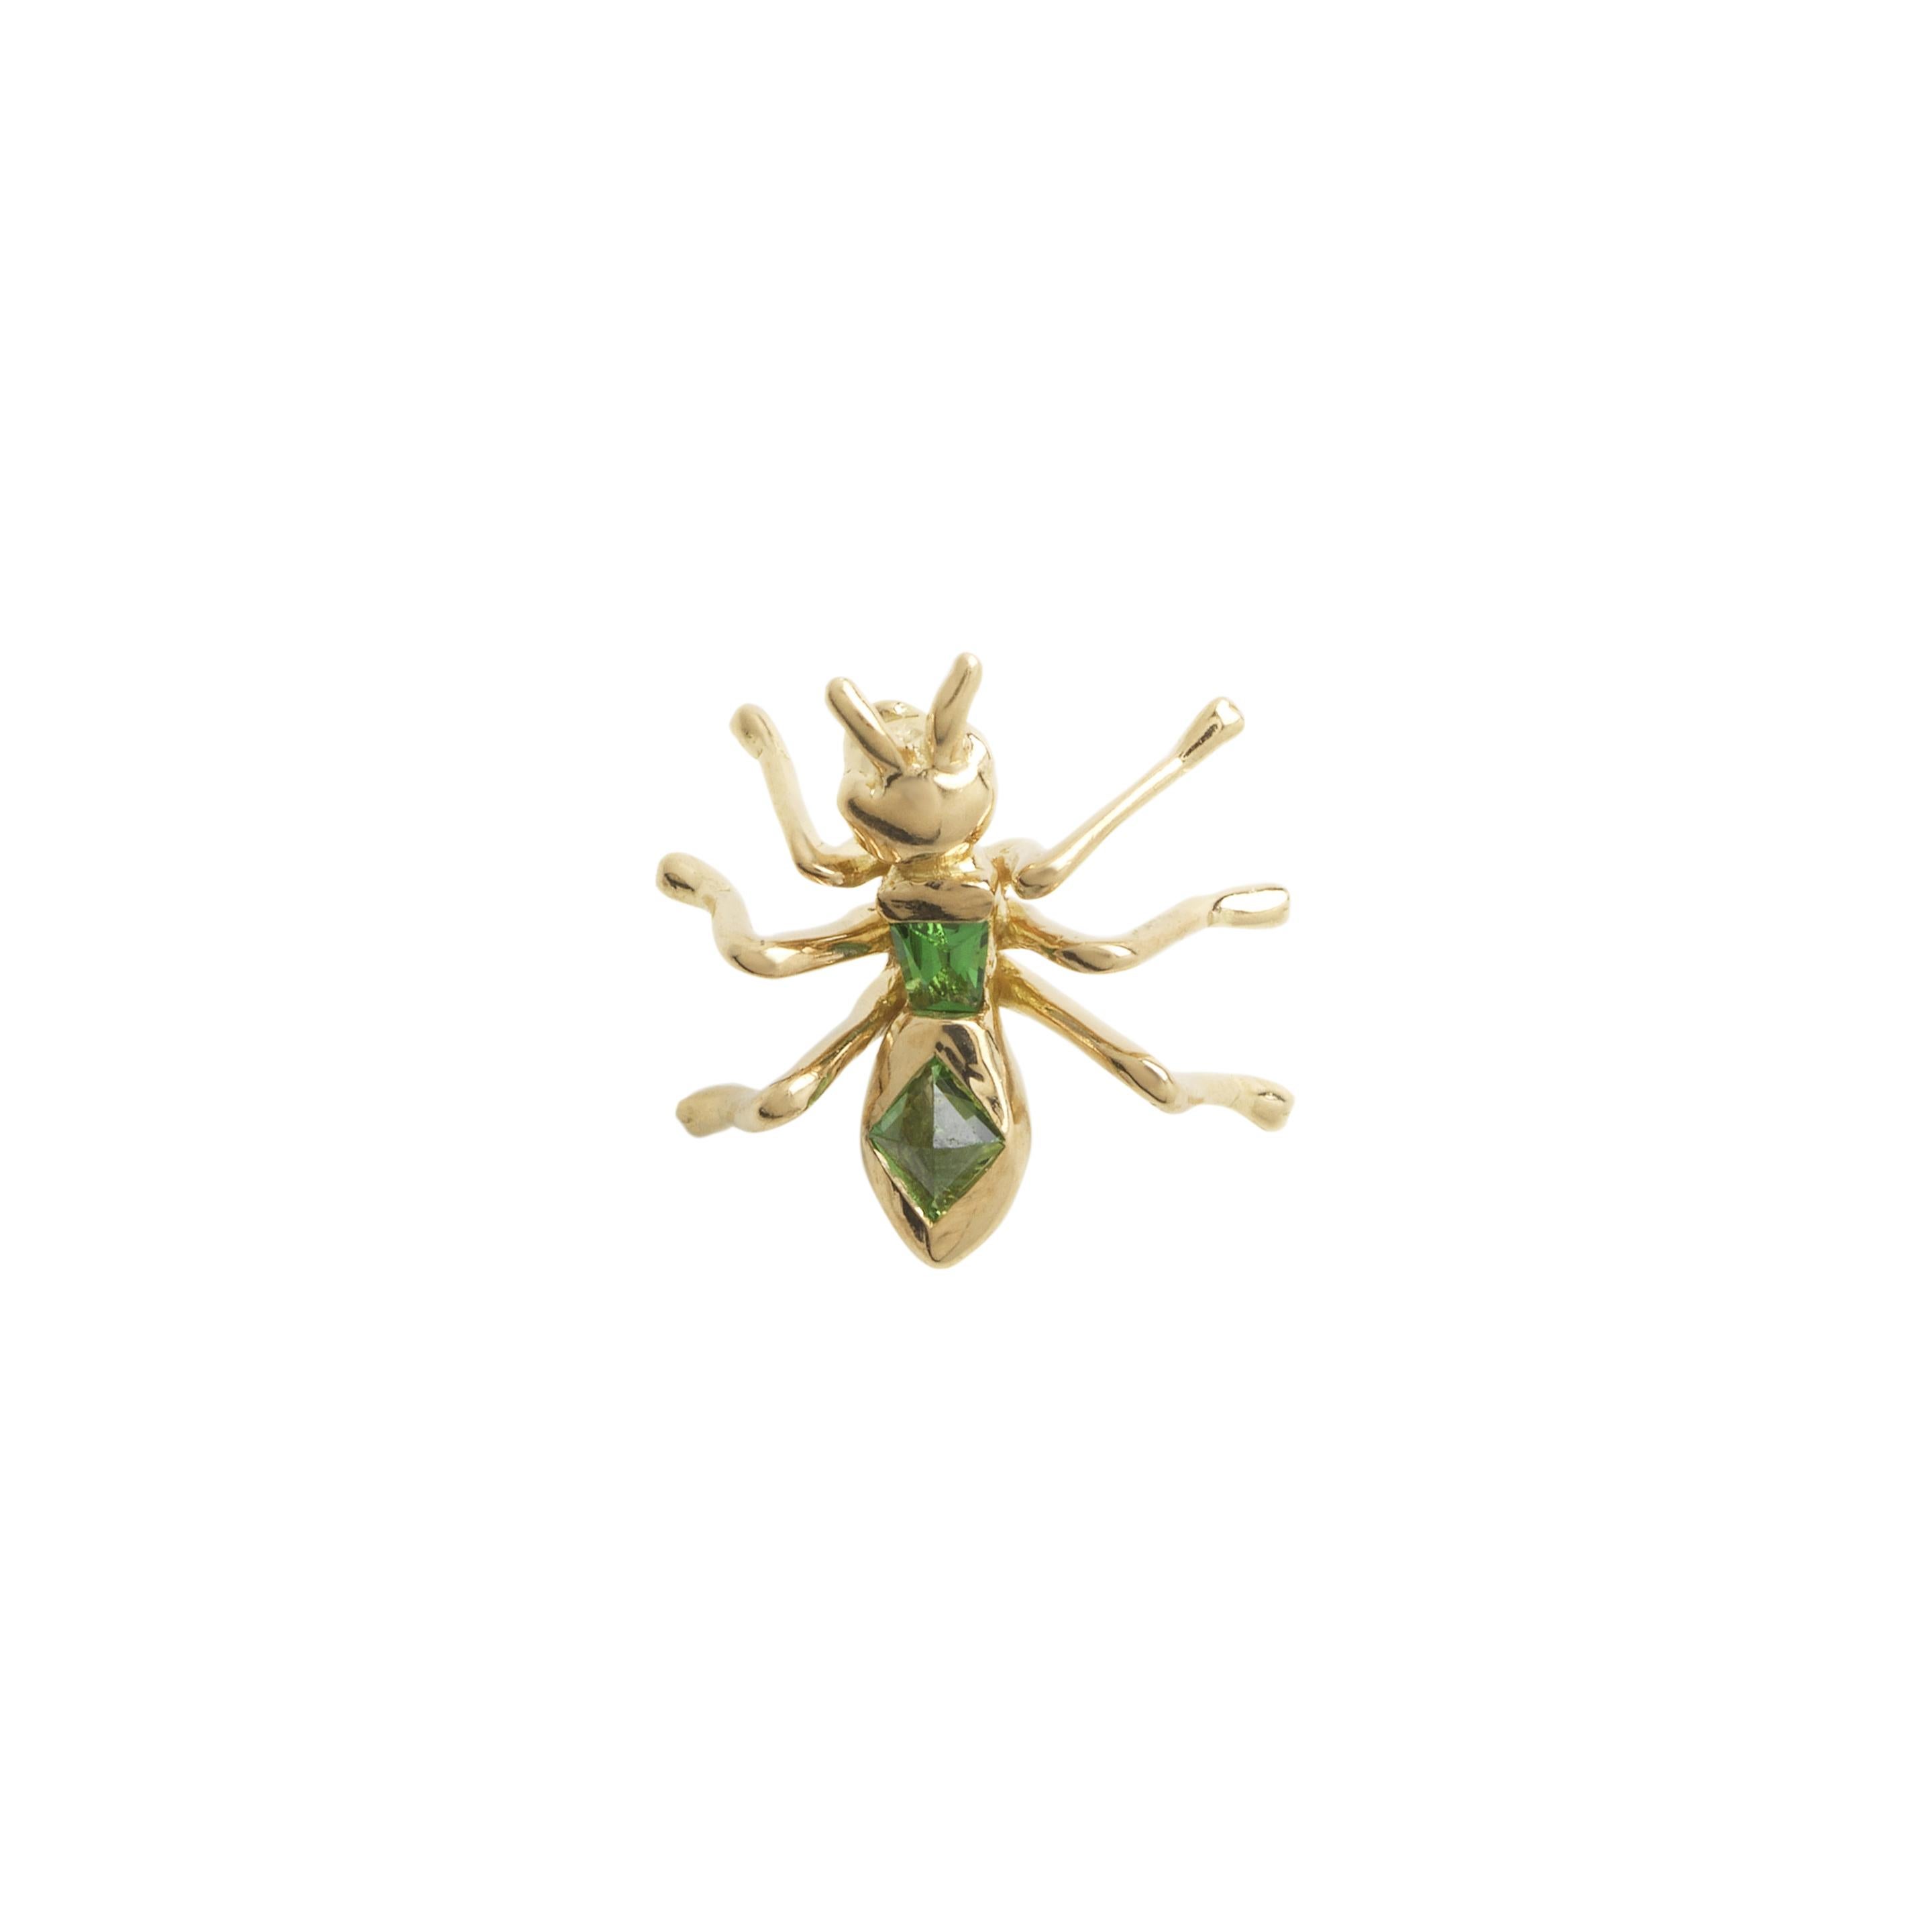 The Ant Stud Earring can be worn alone, or sit alongside multiple piercings in the ear, for a distinctly edgy glamour. The earring is designed in 18k yellow gold and set with a tapered, baguette cut tsavorite on the upper part of its body and a